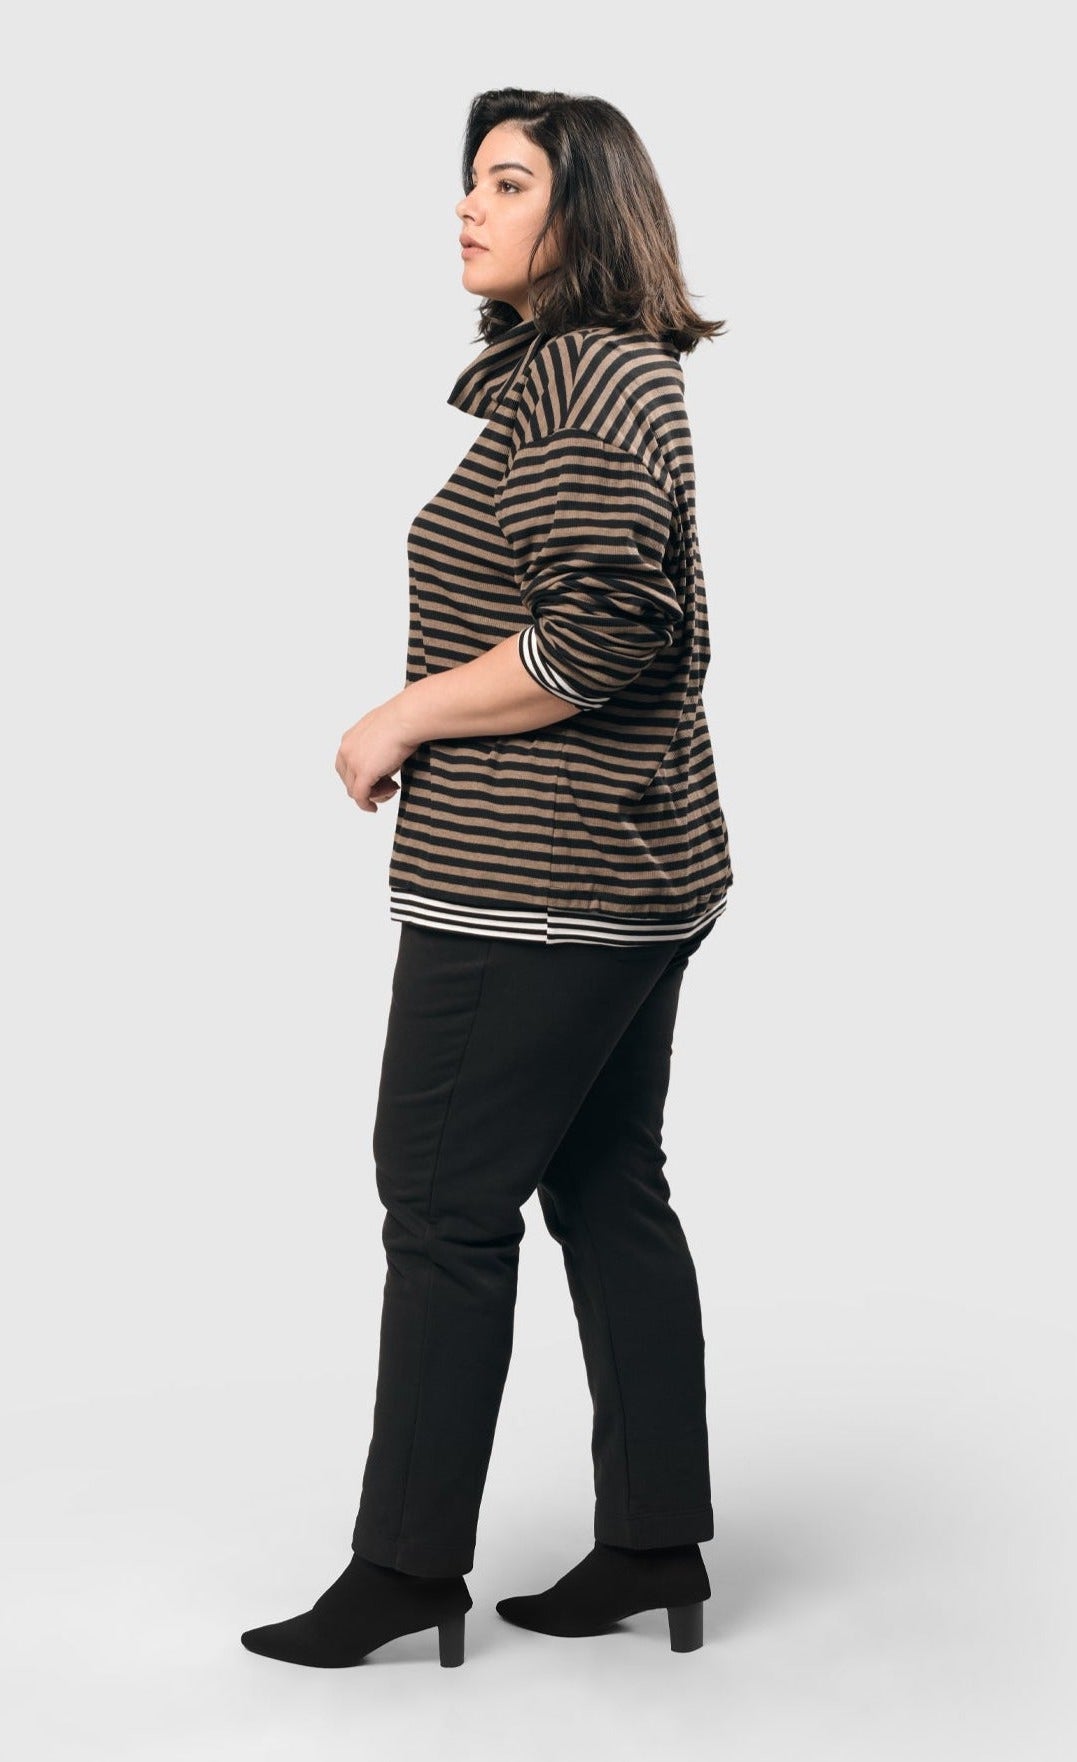 Left side top half view of a woman wearing the Alembika urban gateau cowlneck top in the brown and black striping. The top has a cowlneck, a relaxed fit, and contrasting black and white hems and cuffs.